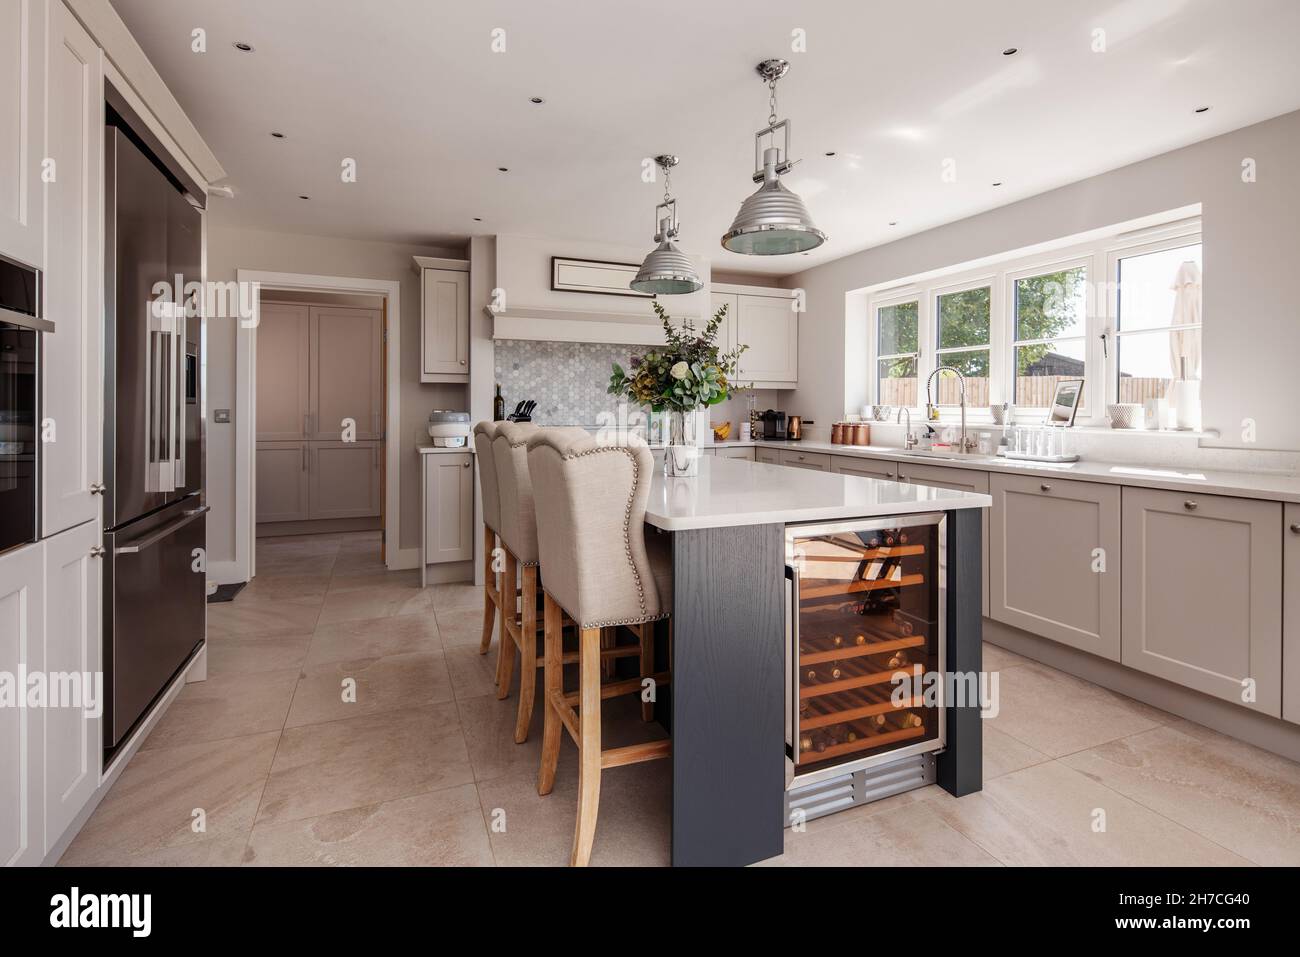 Lawshall, Suffolk, England - May 29 2020: Aspirational luxury fitted kitchen with built in appliances, wine store and peninsula breakfast bar Stock Photo